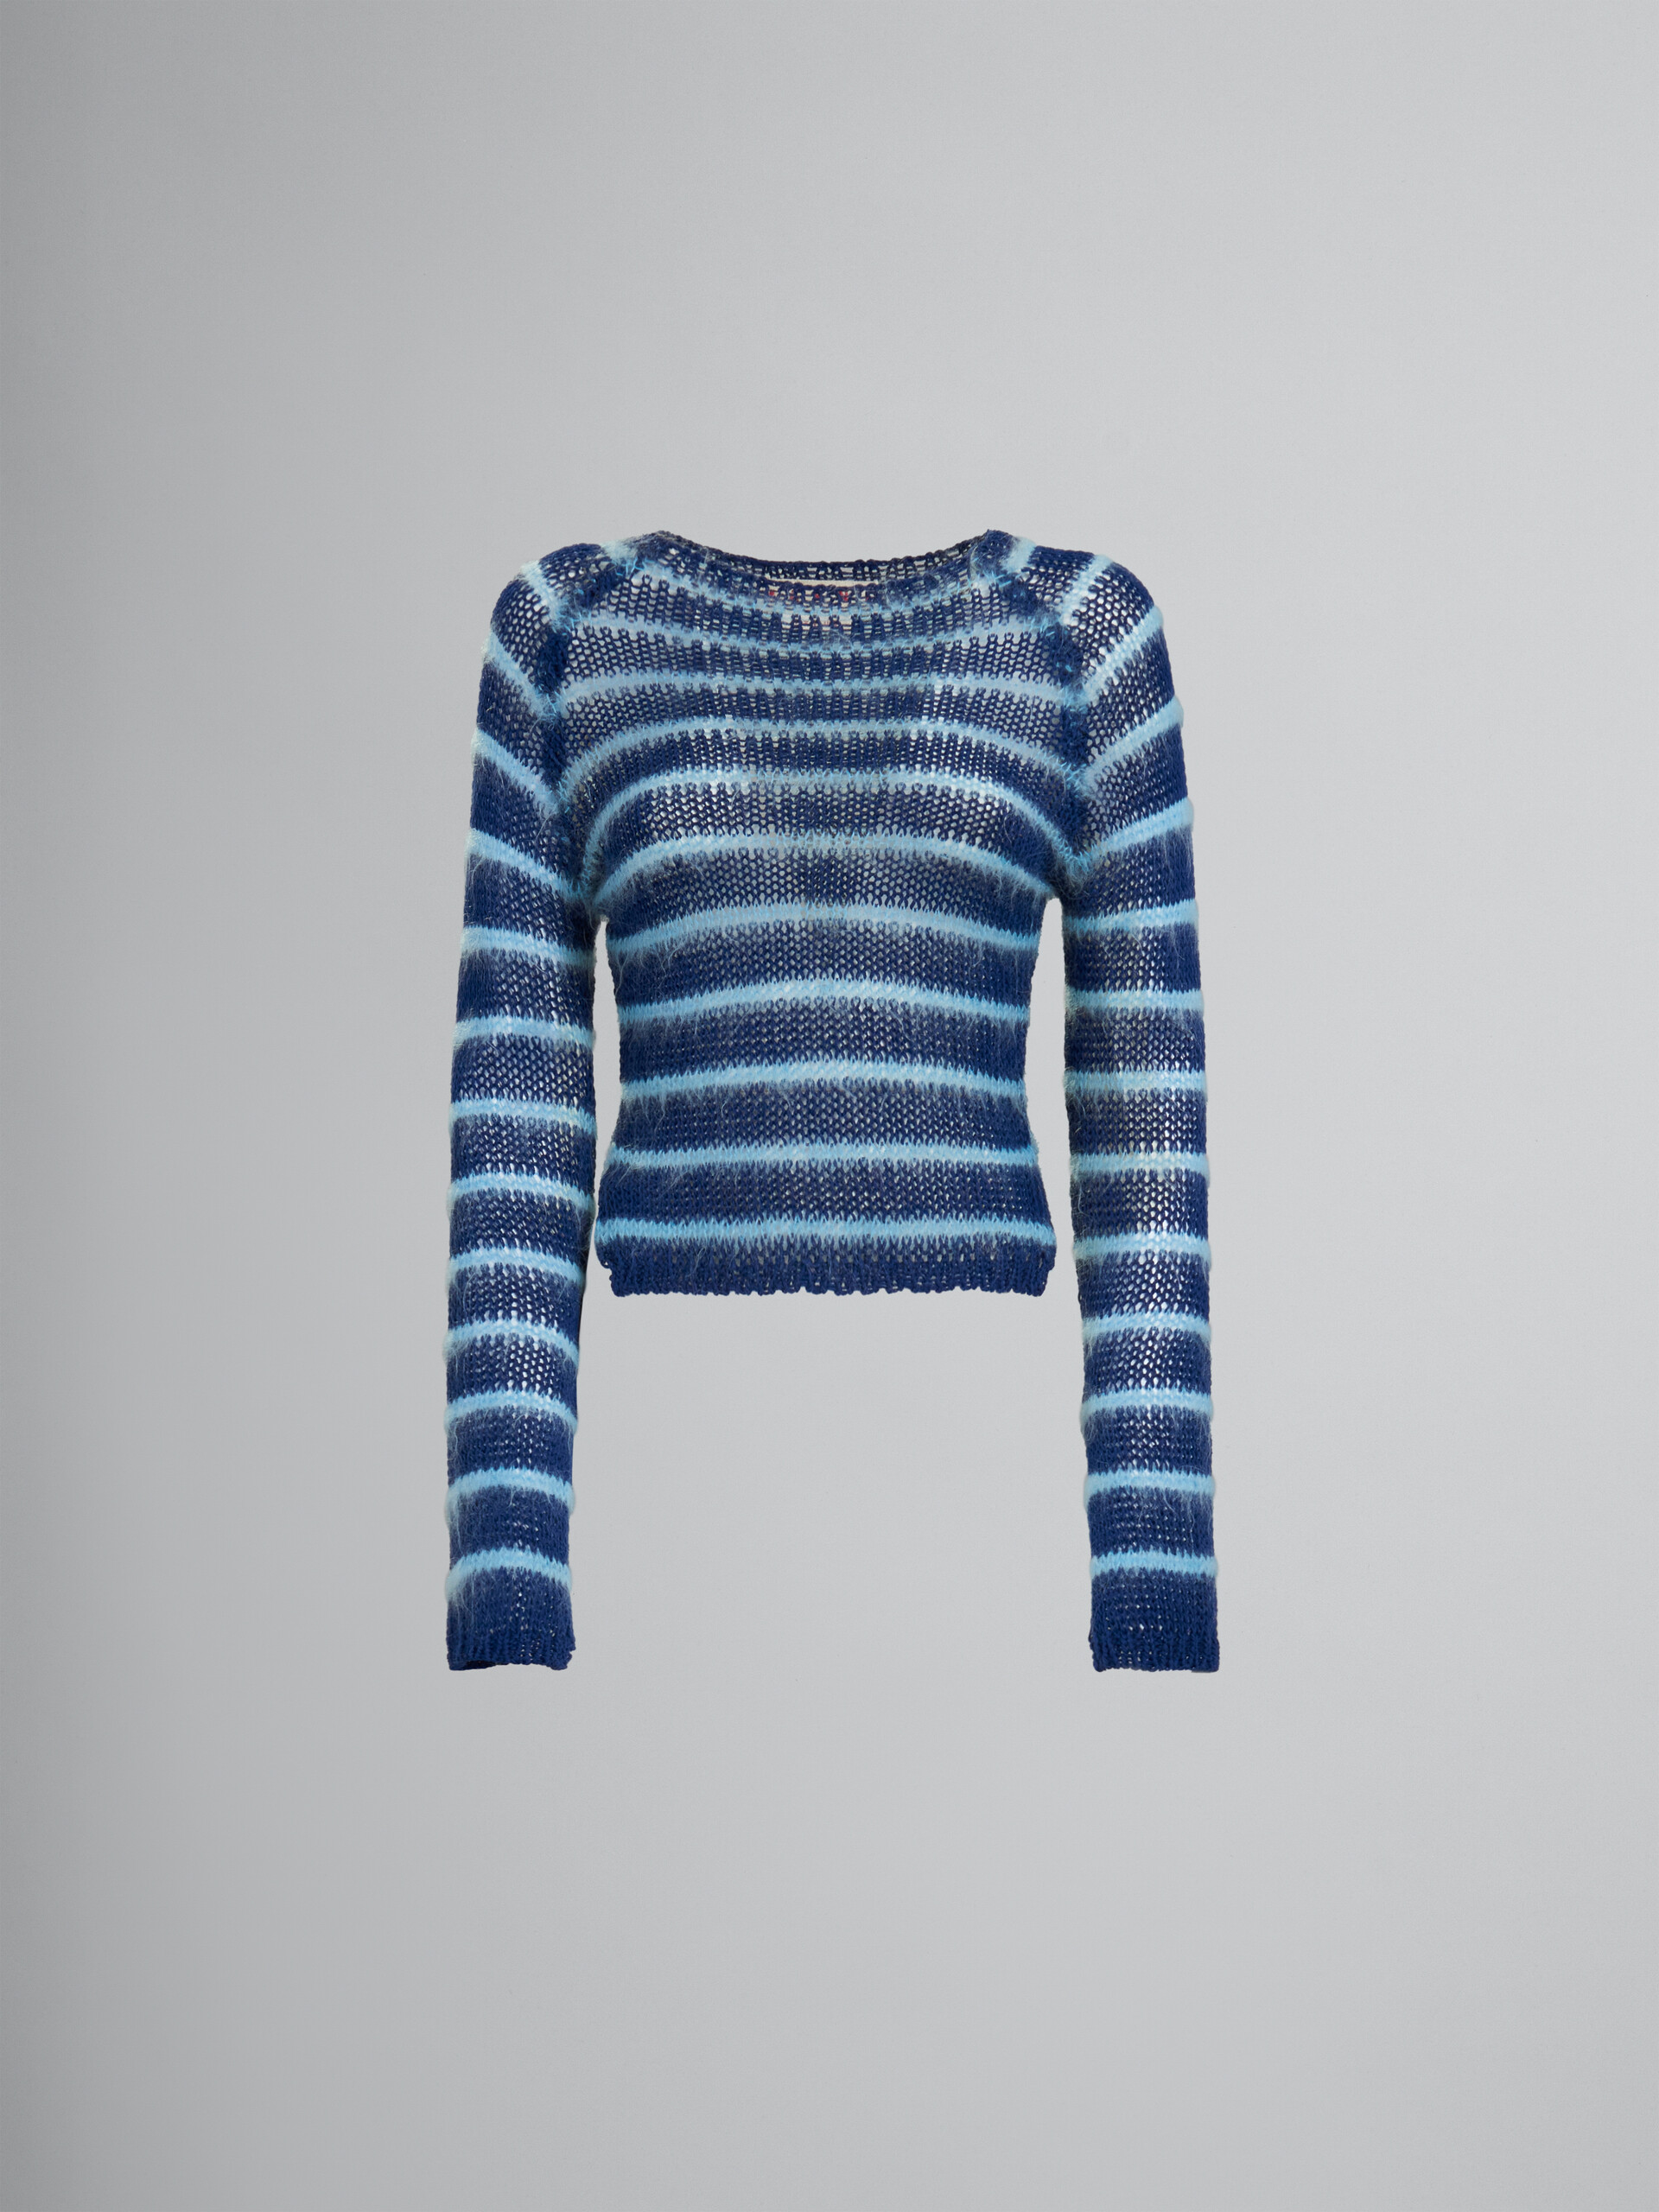 Blue boat-neck jumper with mohair stripes - Pullovers - Image 1